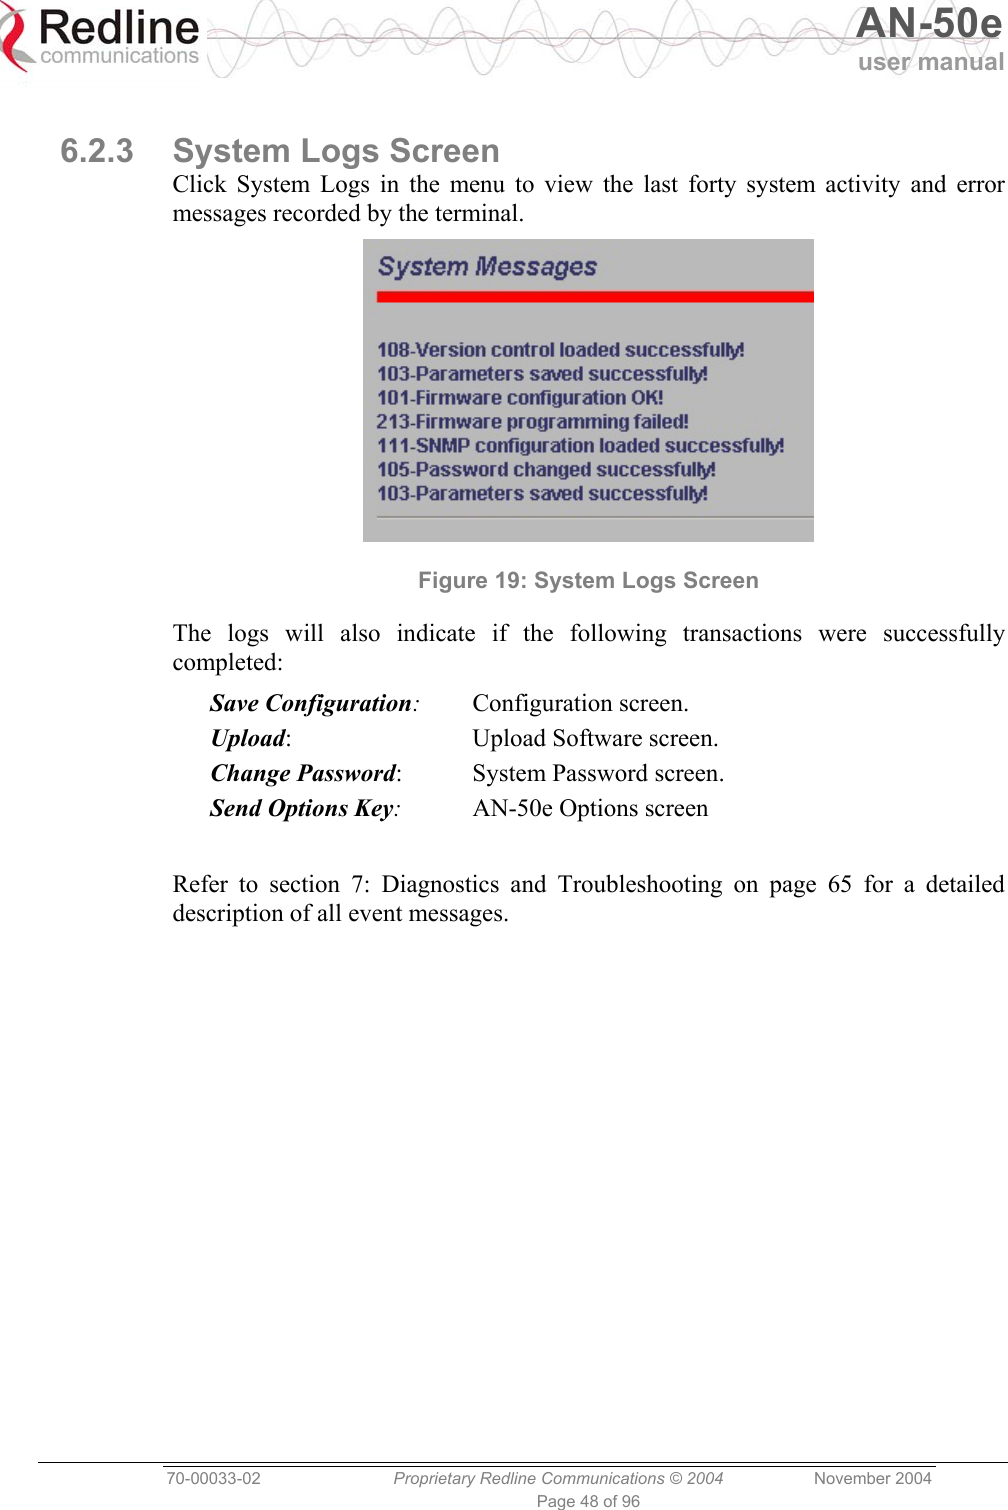   AN-50e user manual  70-00033-02  Proprietary Redline Communications © 2004 November 2004 Page 48 of 96  6.2.3 System Logs Screen Click System Logs in the menu to view the last forty system activity and error messages recorded by the terminal.  Figure 19: System Logs Screen The logs will also indicate if the following transactions were successfully completed: Save Configuration: Configuration screen. Upload:  Upload Software screen. Change Password:  System Password screen. Send Options Key:  AN-50e Options screen  Refer to section 7: Diagnostics and Troubleshooting on page 65 for a detailed description of all event messages. 